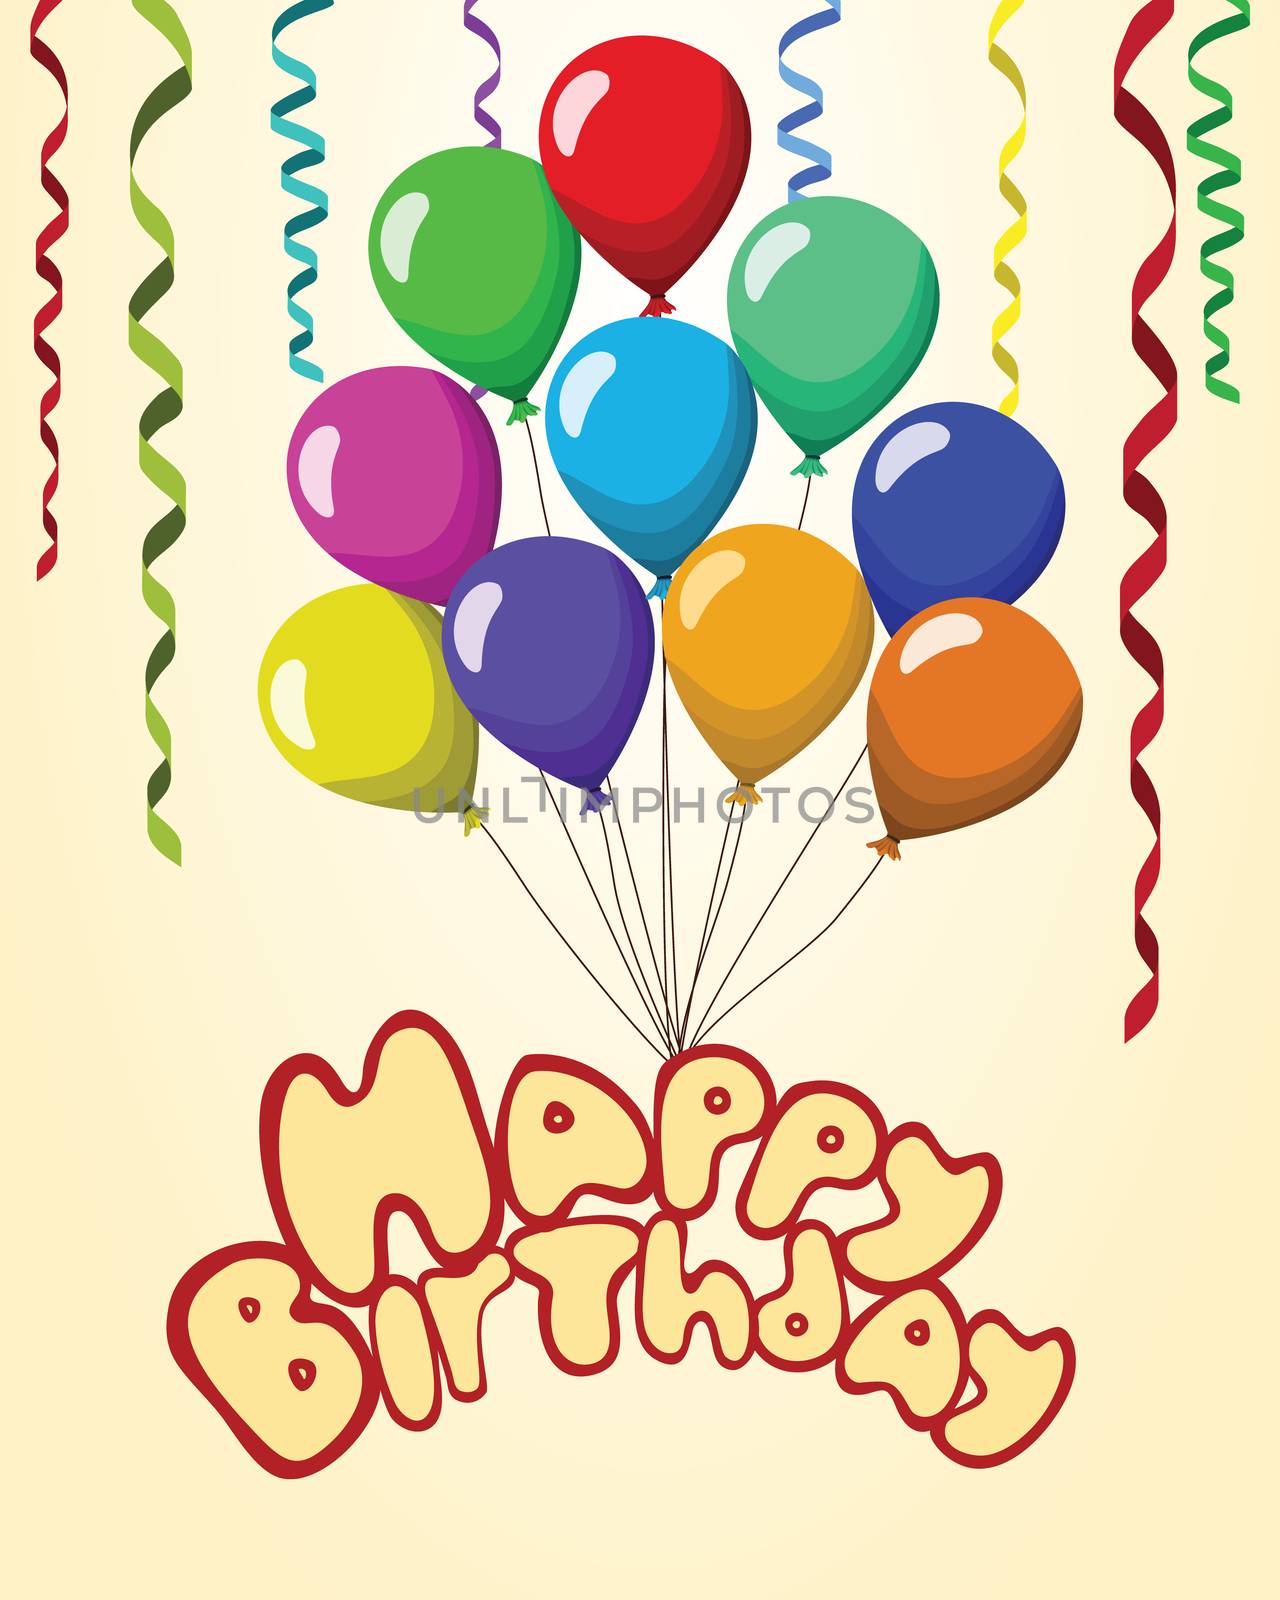 Happy birthday Text baloons ribbons pastel background by Lemon_workshop